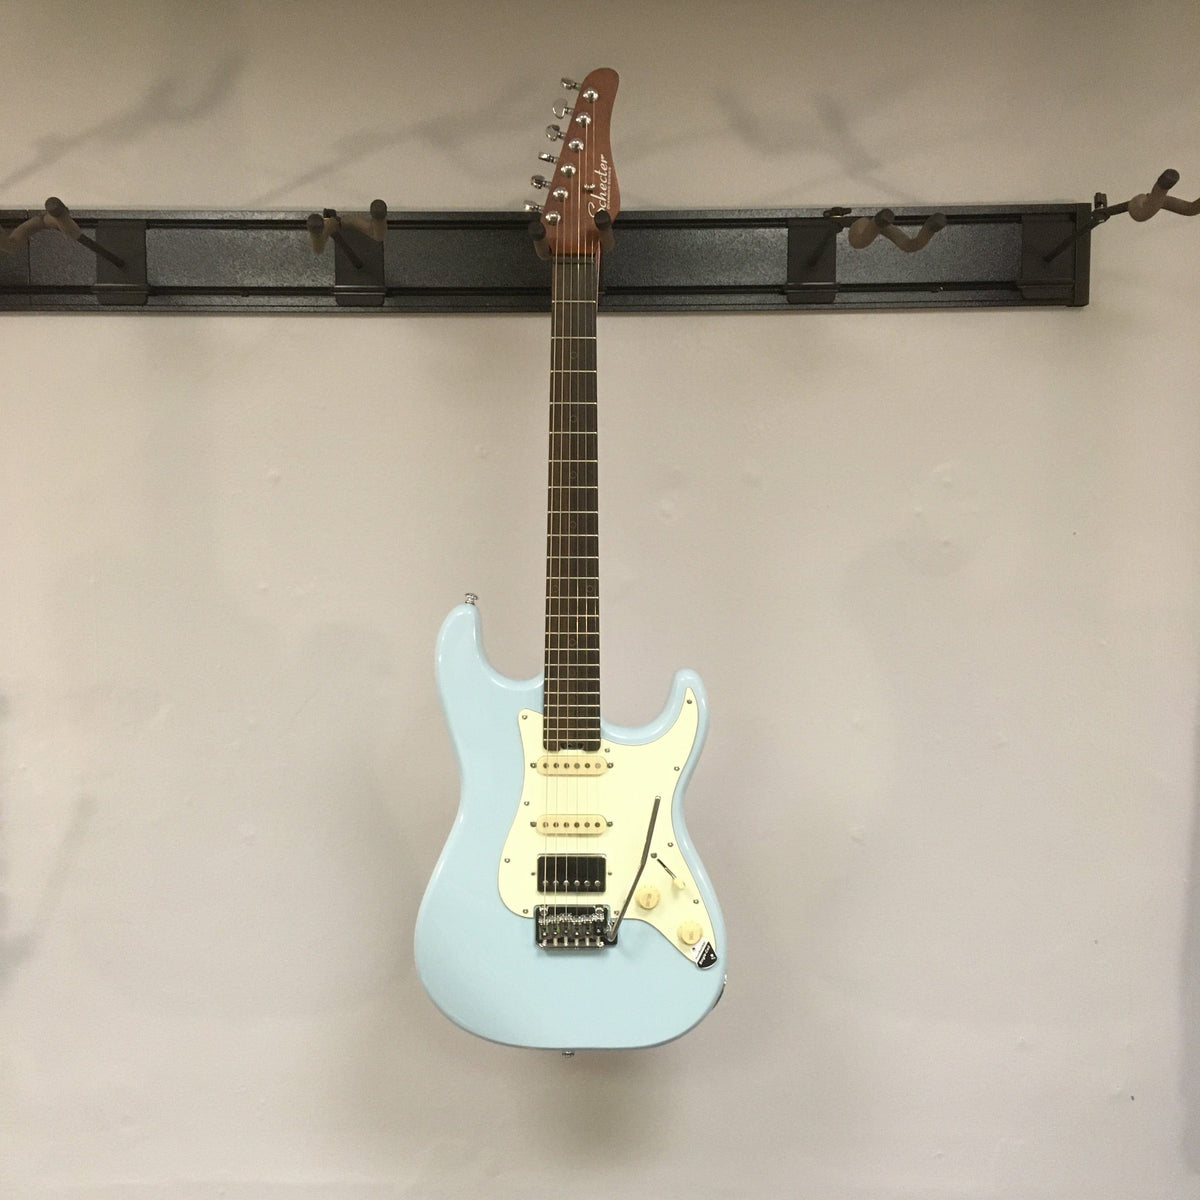 Schecter Nick Johnston Traditional H/S/S Atomic Frost